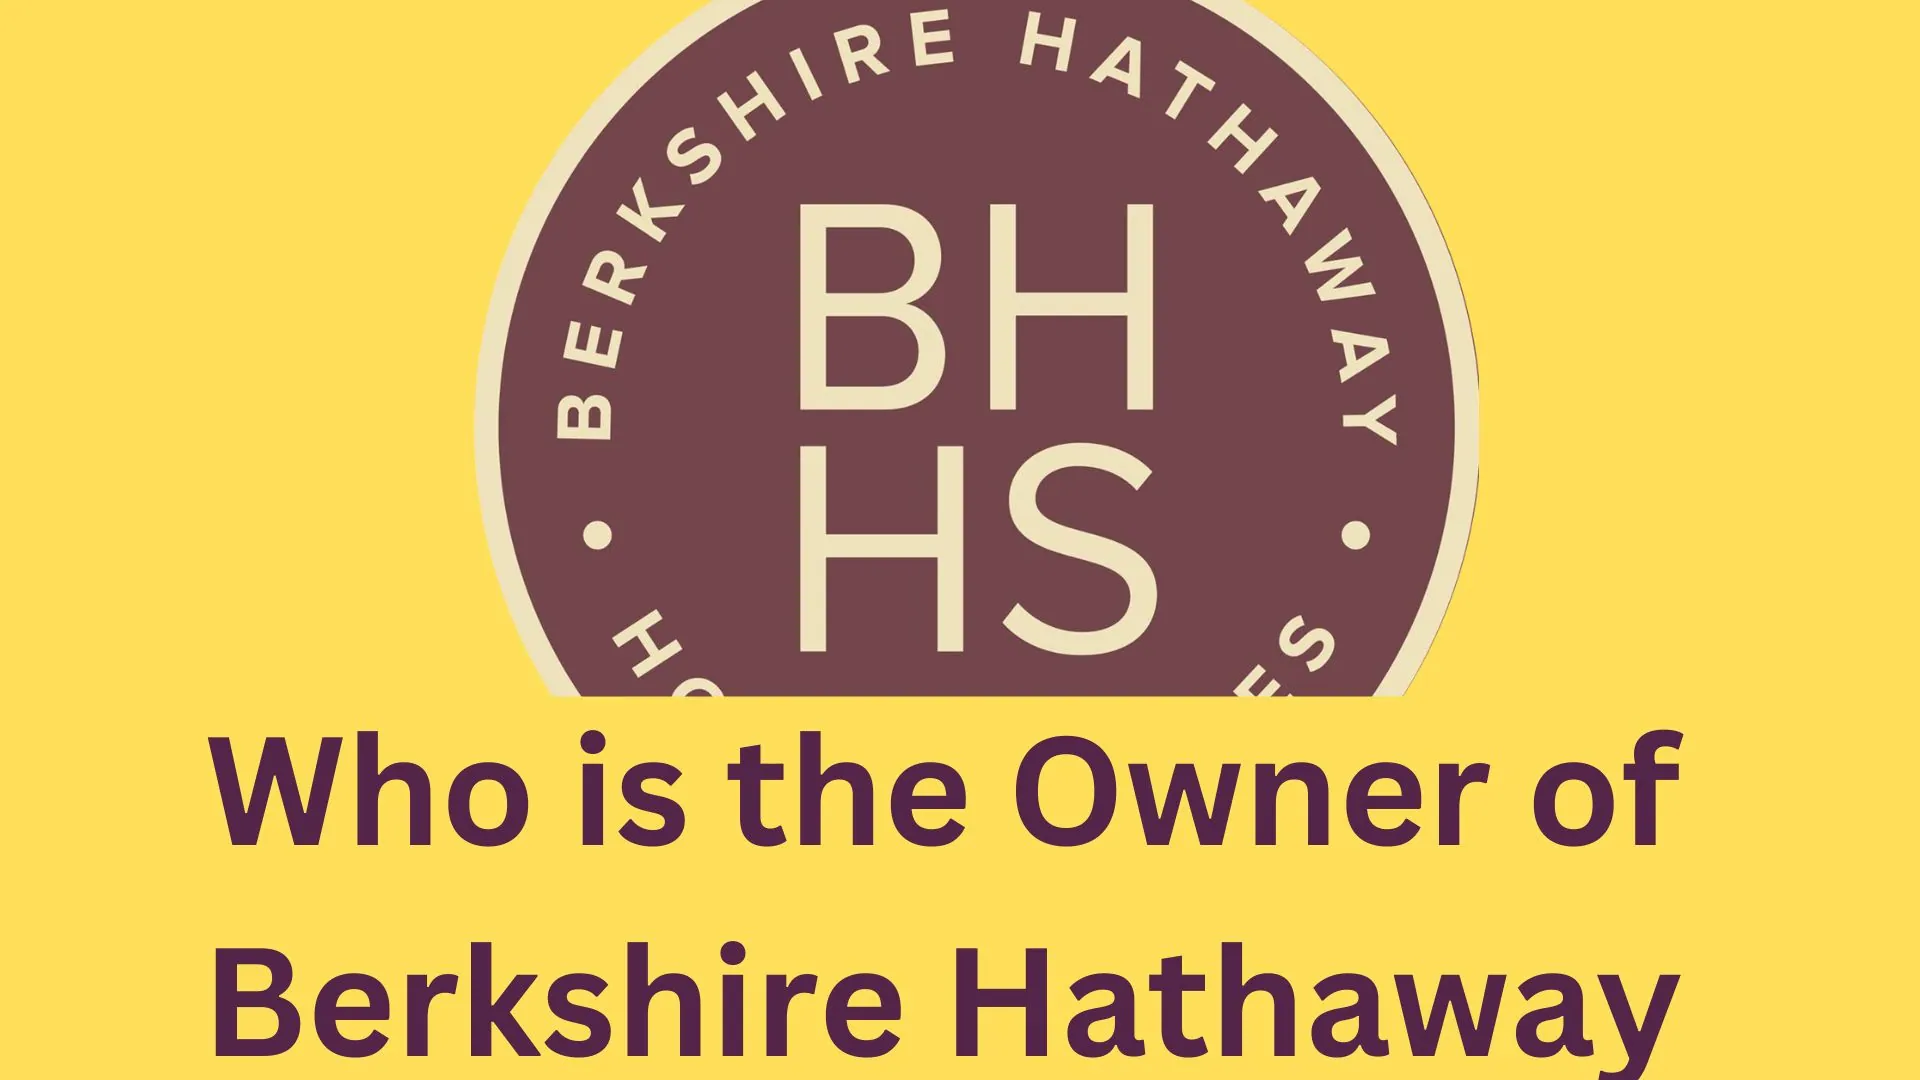 Owner of Berkshire Hathaway and Net Worth